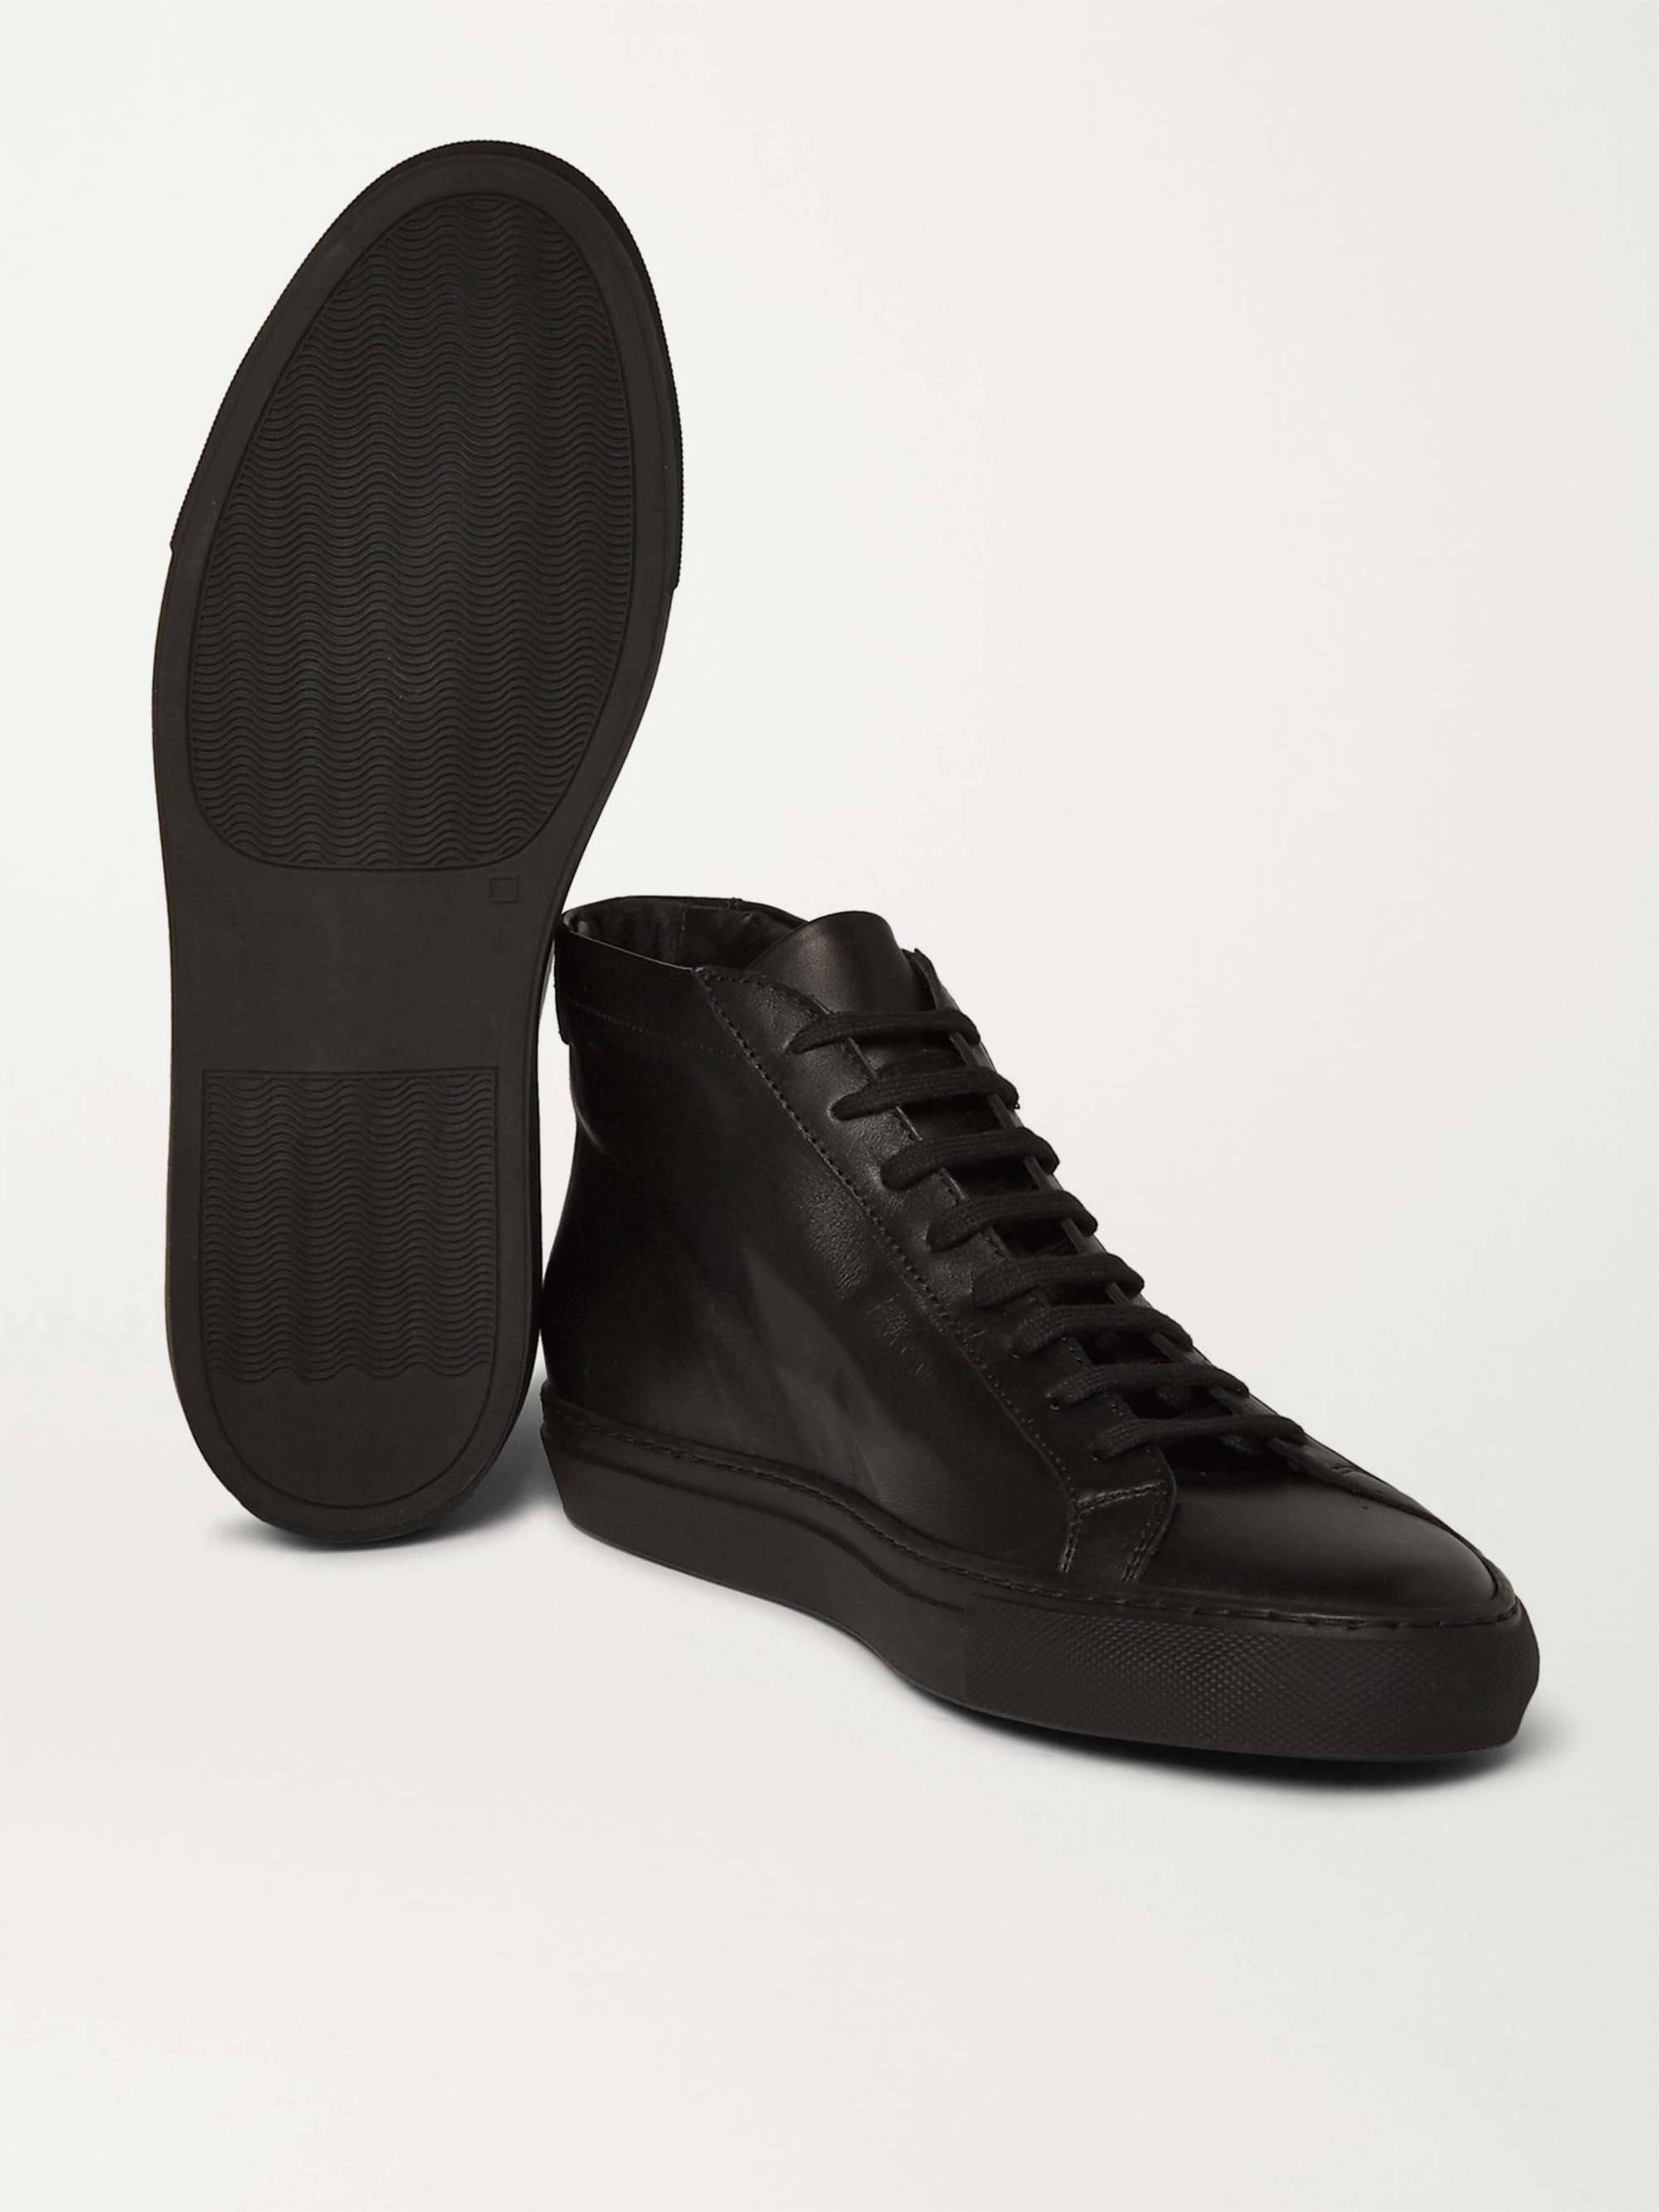 COMMON PROJECTS Original Achilles High-Top Sneakers for Men | MR